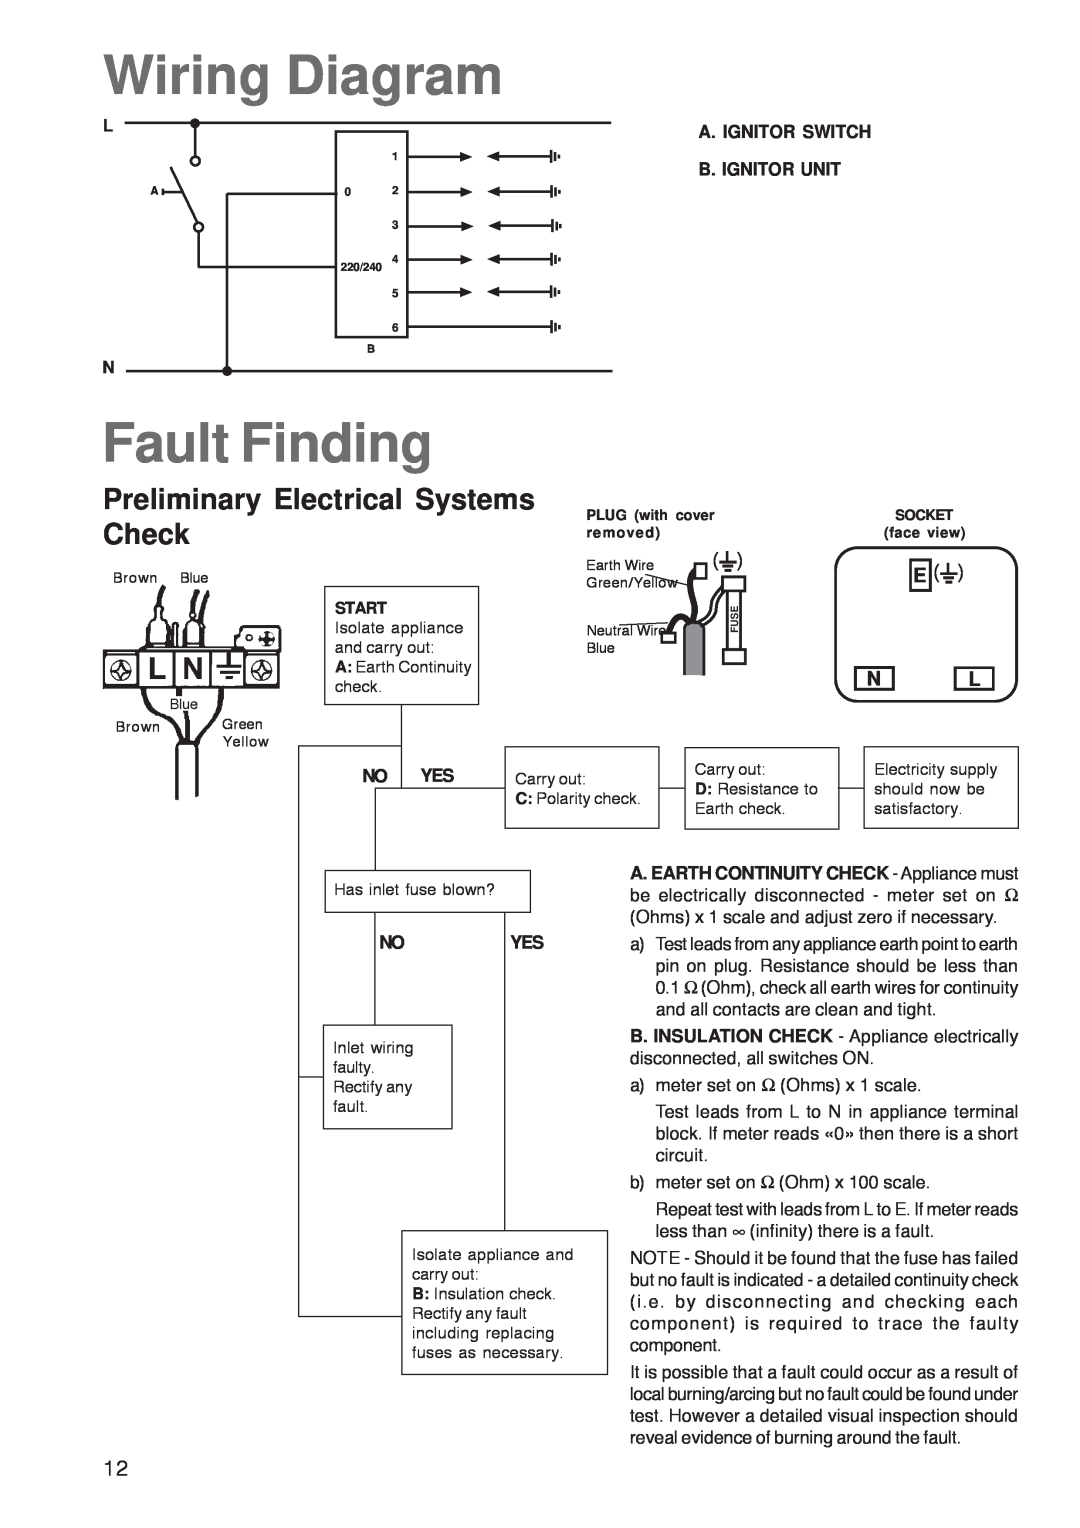 Zanussi ZGF 7820 Wiring Diagram, Fault Finding, Preliminary Electrical Systems Check, A. Ignitor Switch B. Ignitor Unit 